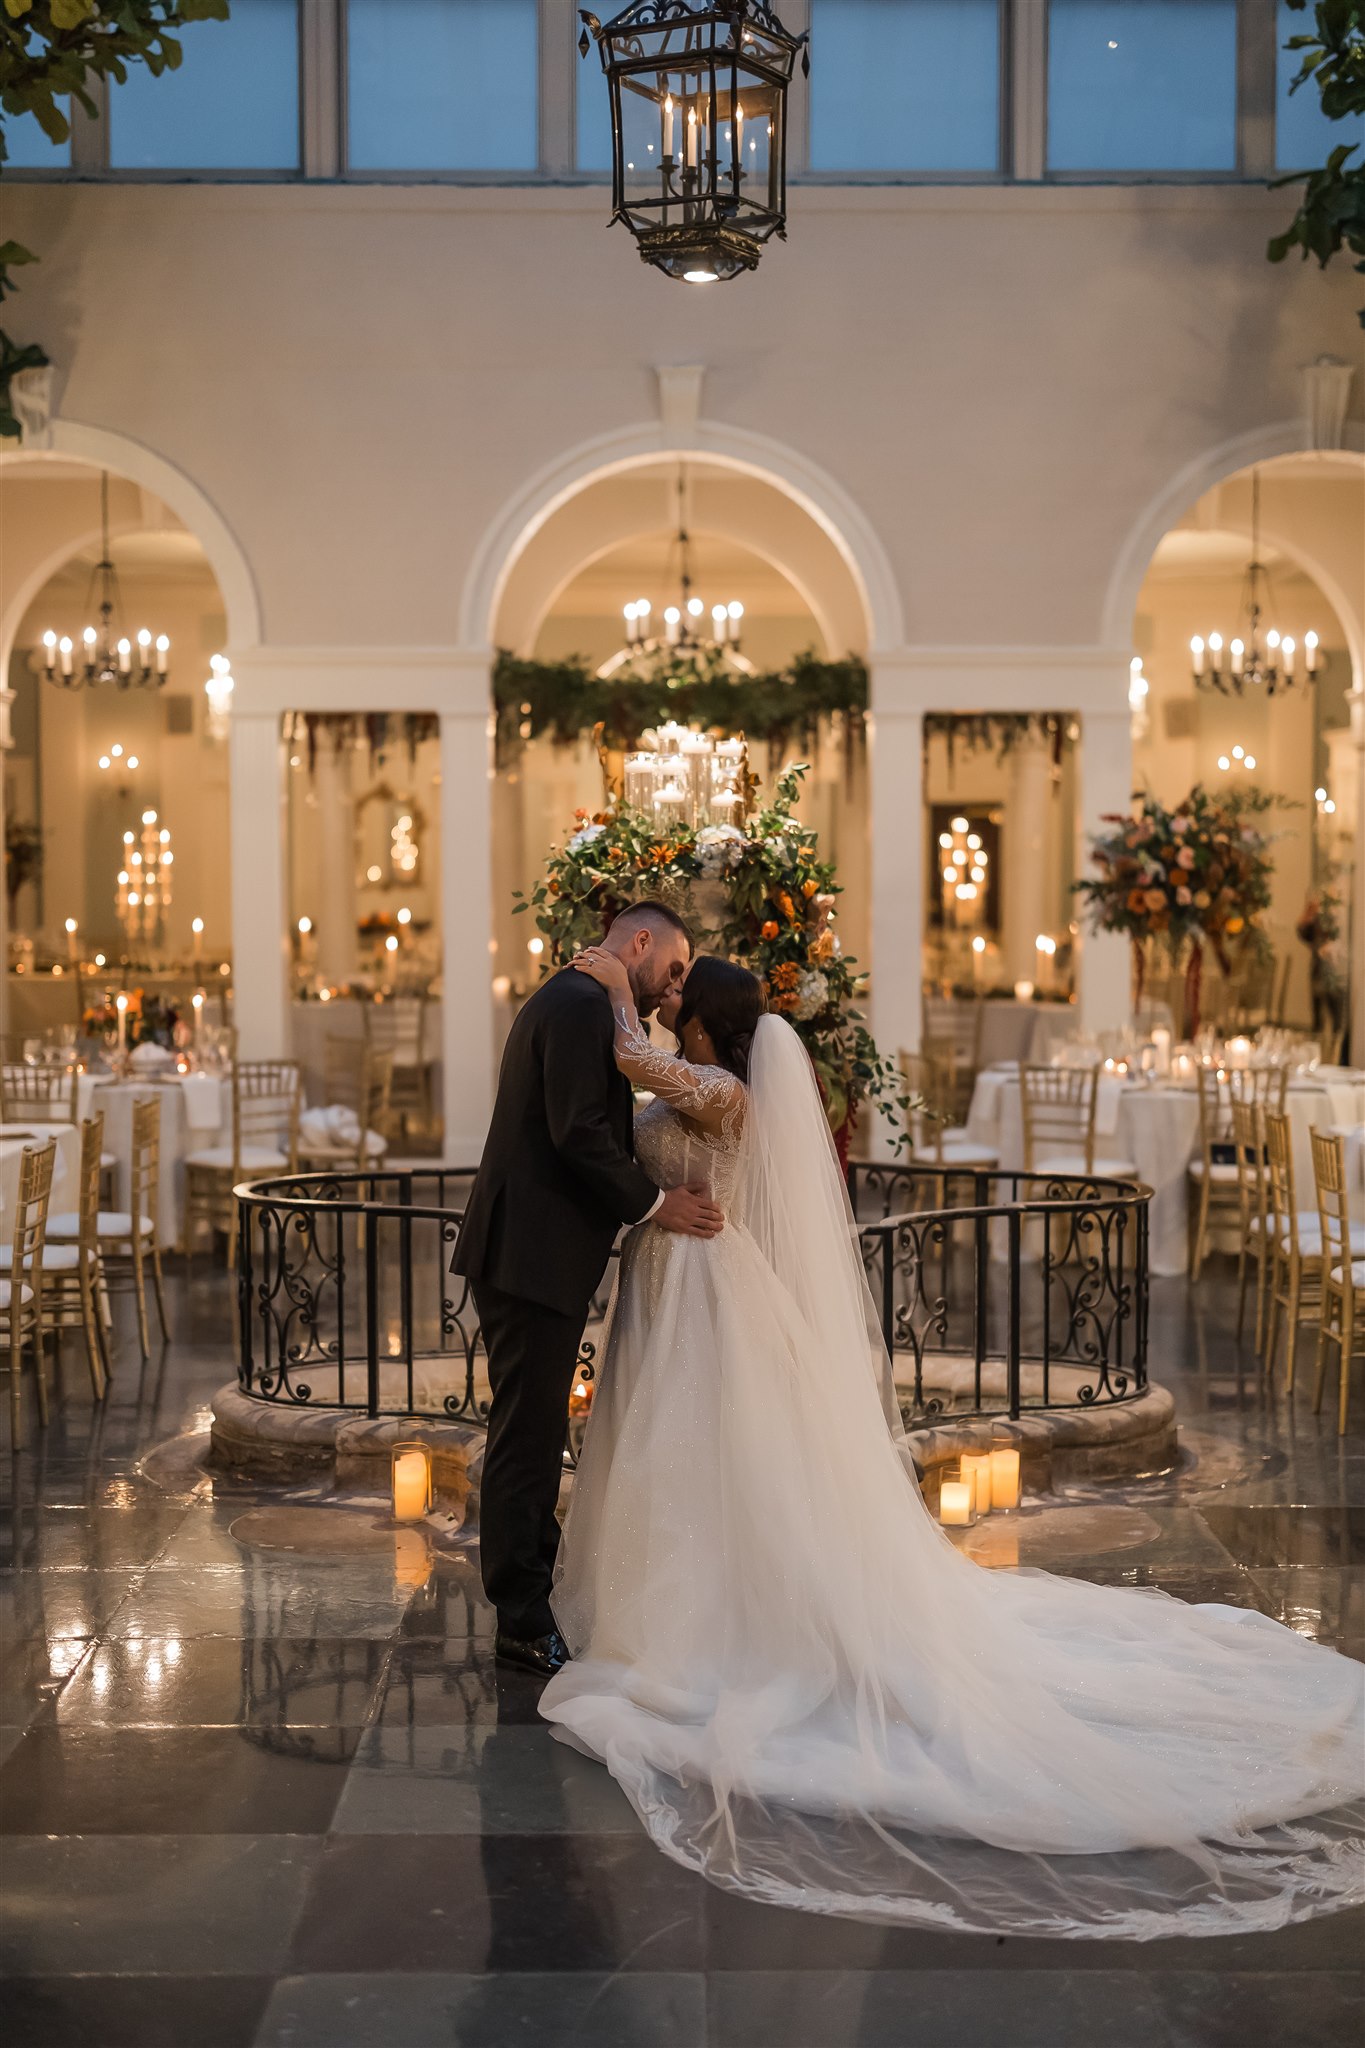 A photo of a bride and groom kissing in a beautifully lit reception area at a wedding.